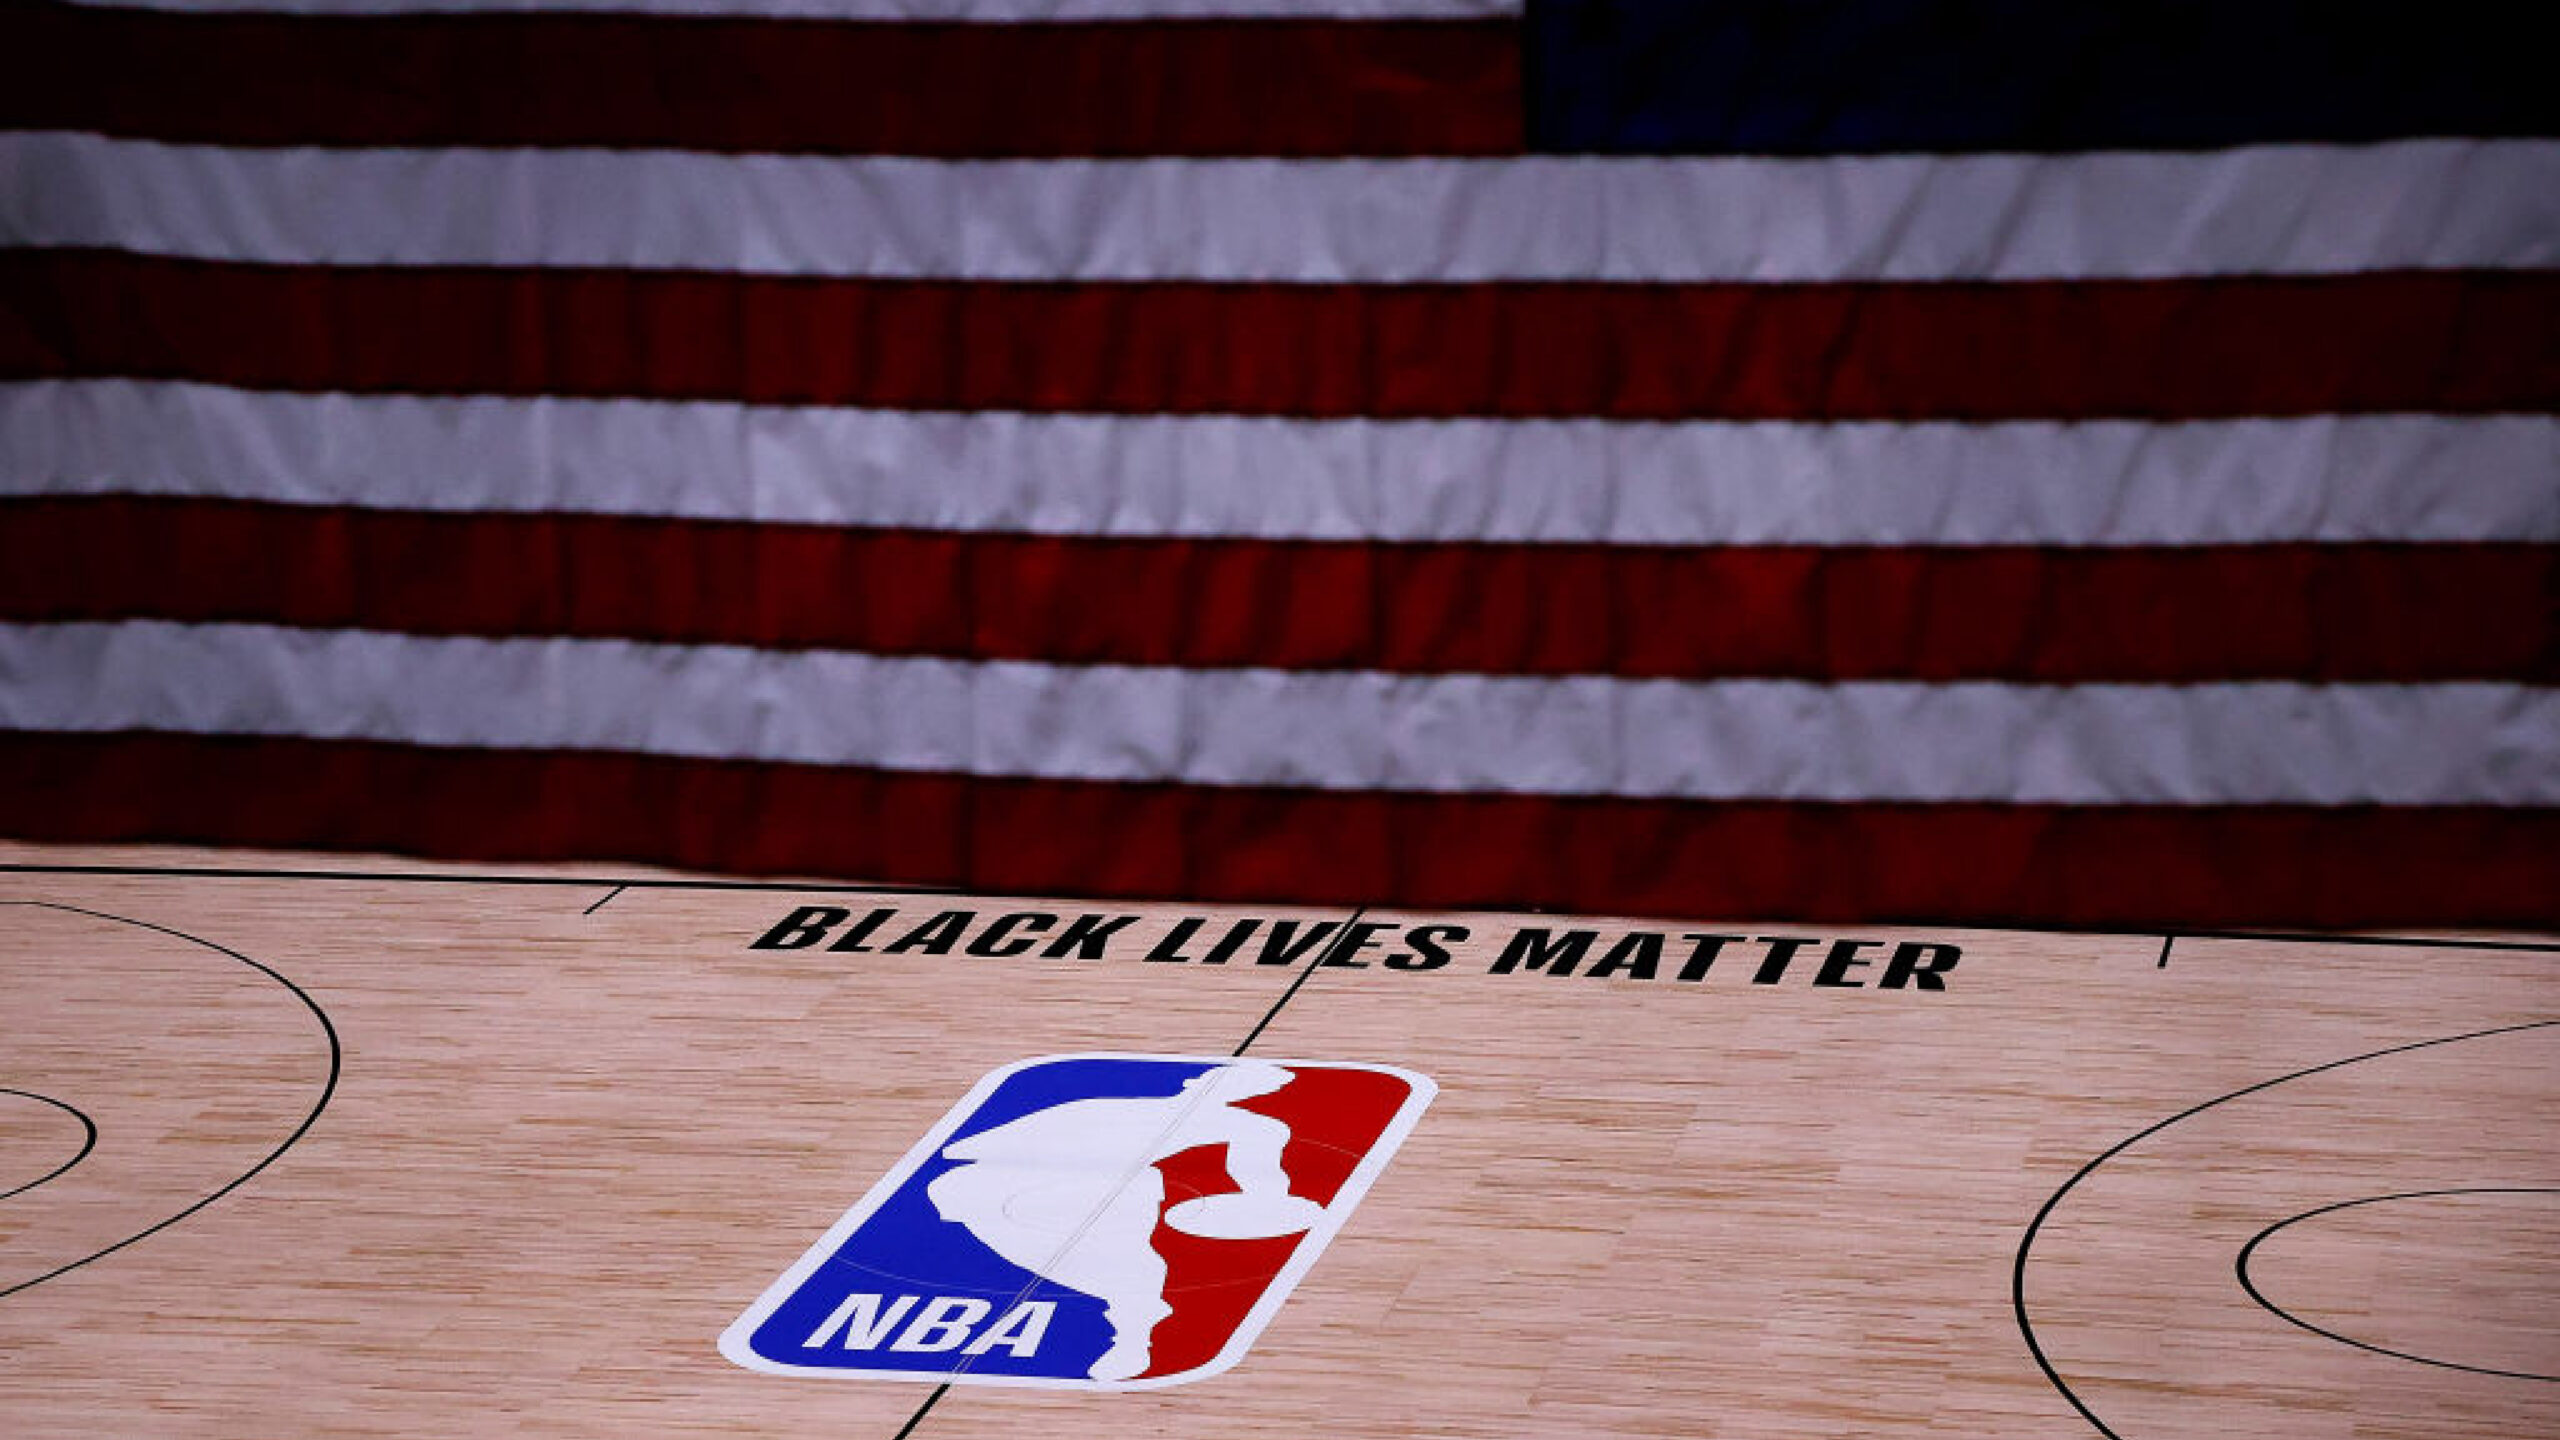 LAKE BUENA VISTA, FLORIDA - AUGUST 27: The Black Lives Matter logo is seen on an empty court as all NBA playoff games were postponed today during the 2020 NBA Playoffs at The Field House at ESPN Wide World Of Sports Complex on August 27, 2020 in Lake Buena Vista, Florida. NBA players have reportedly decided to resume the season after their walkout of playoff games on Wednesday to protest the shooting of Jacob Blake in Kenosha, Wisconsin. (Photo by Kevin C. Cox/Getty Images)